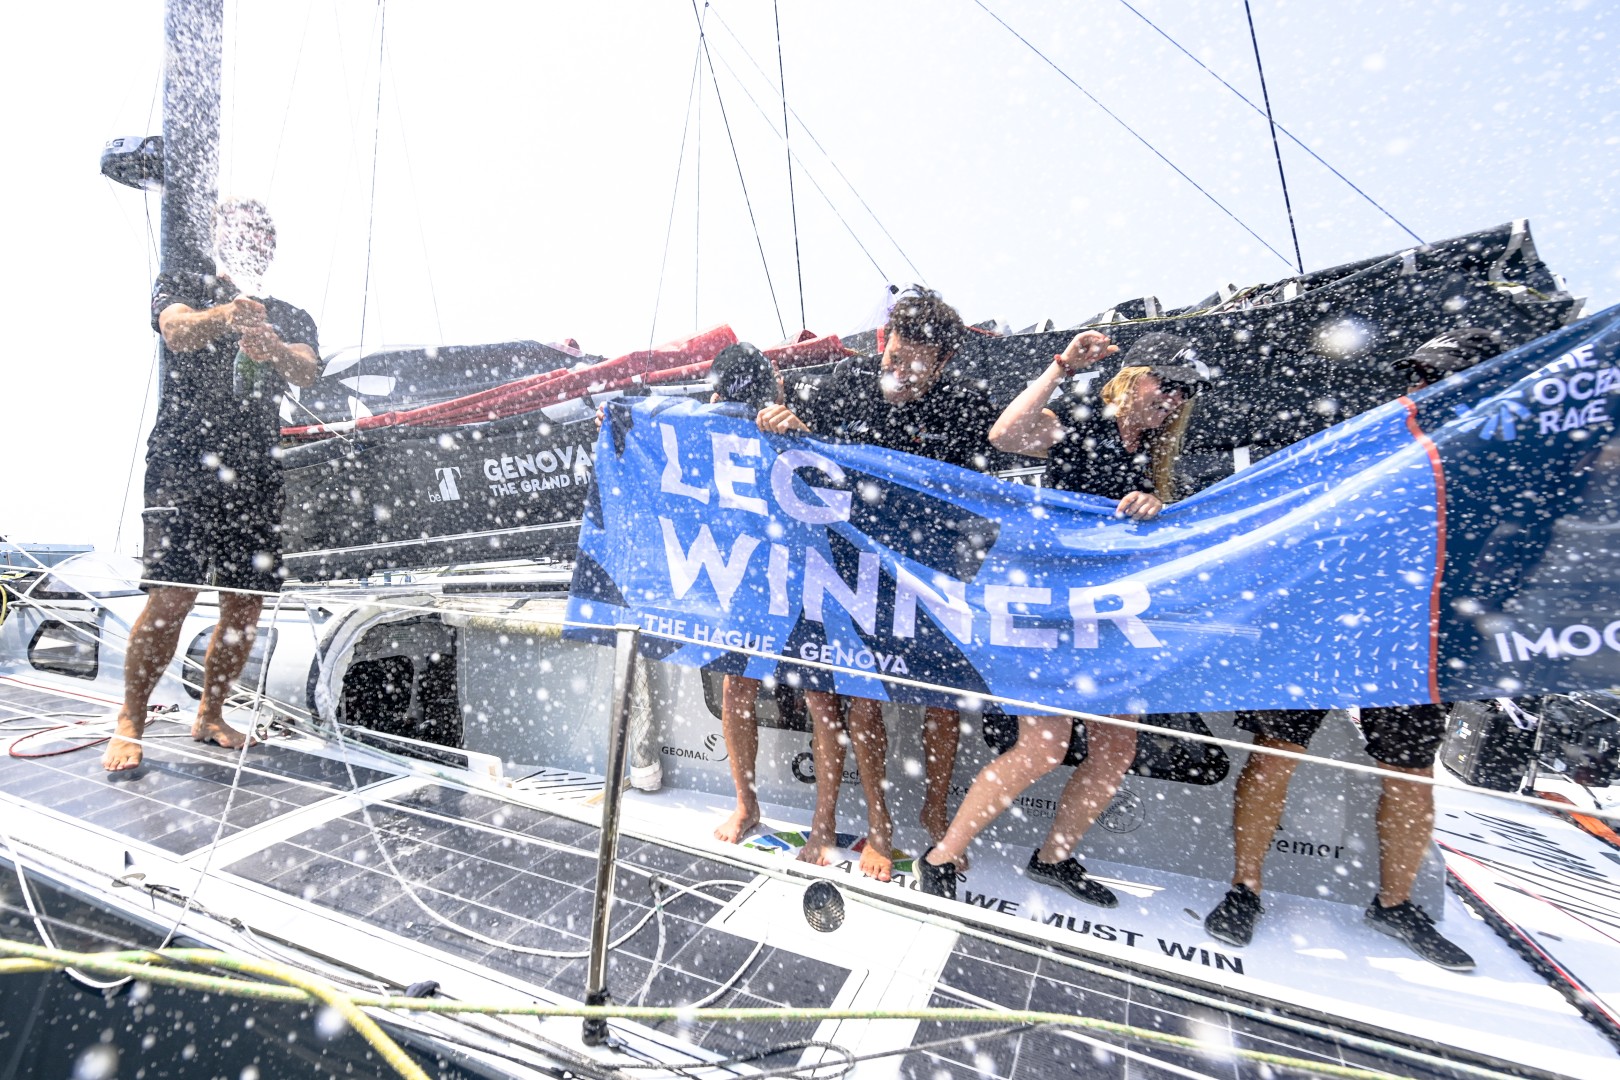 Team Malizia arriving in the first position to Genova, Italy. Arrival: 27/06/2023 11:17:51 UTC, Race time : 11d 19h 02min 51s.
© Sailing Energy / The Ocean Race